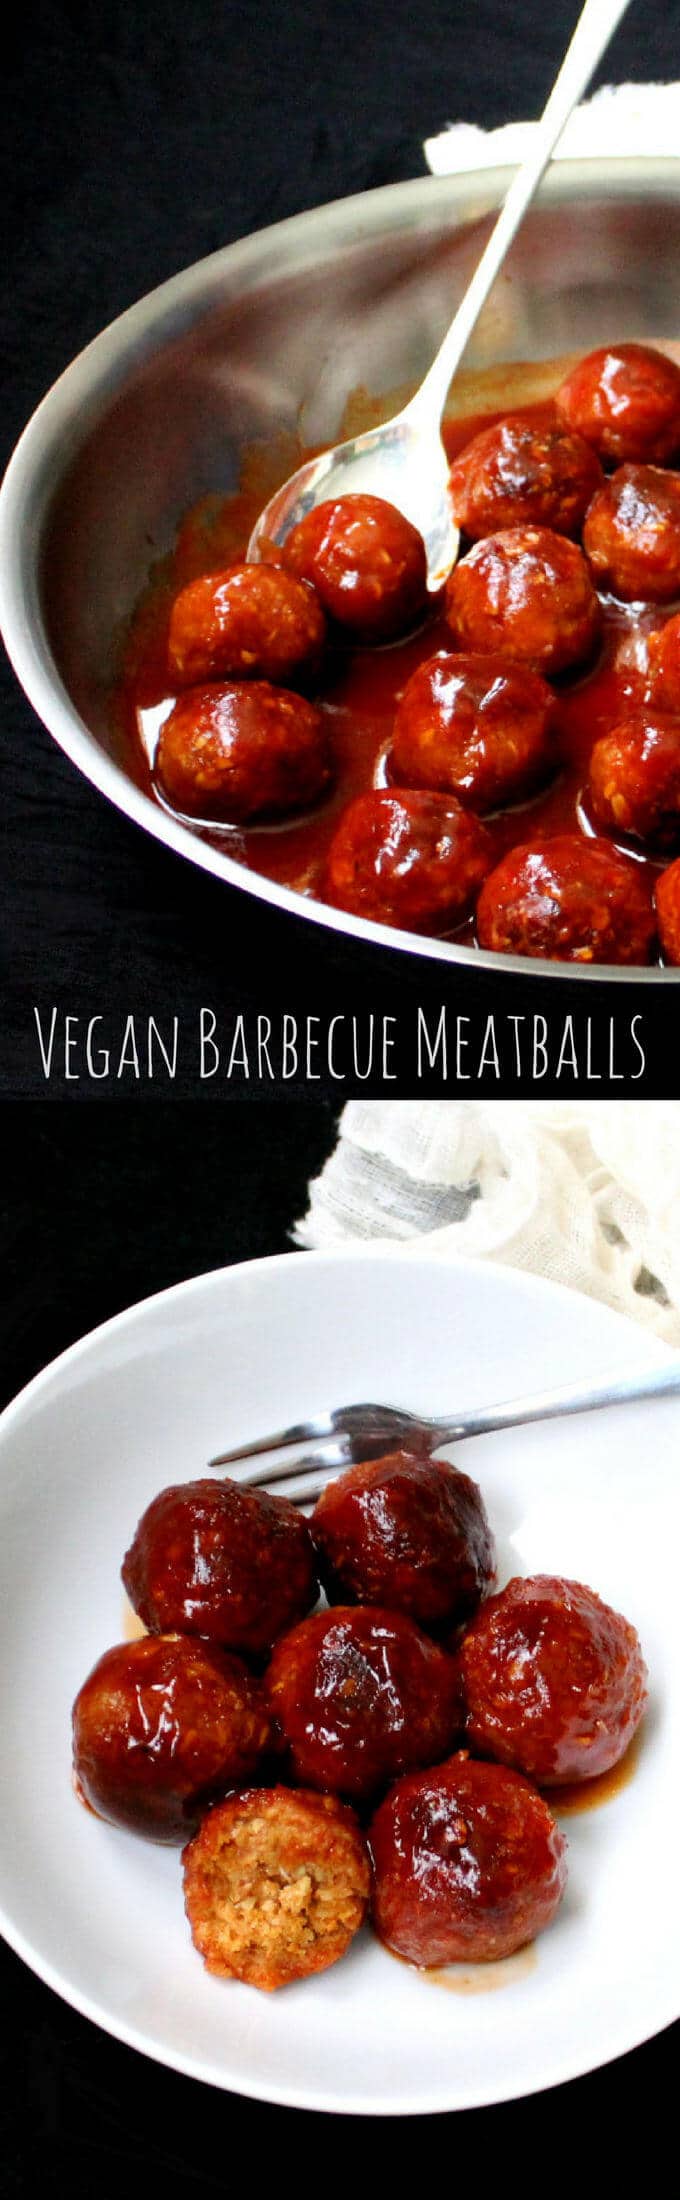 Images of meatballs with text that says "vegan barbecue meatballs"